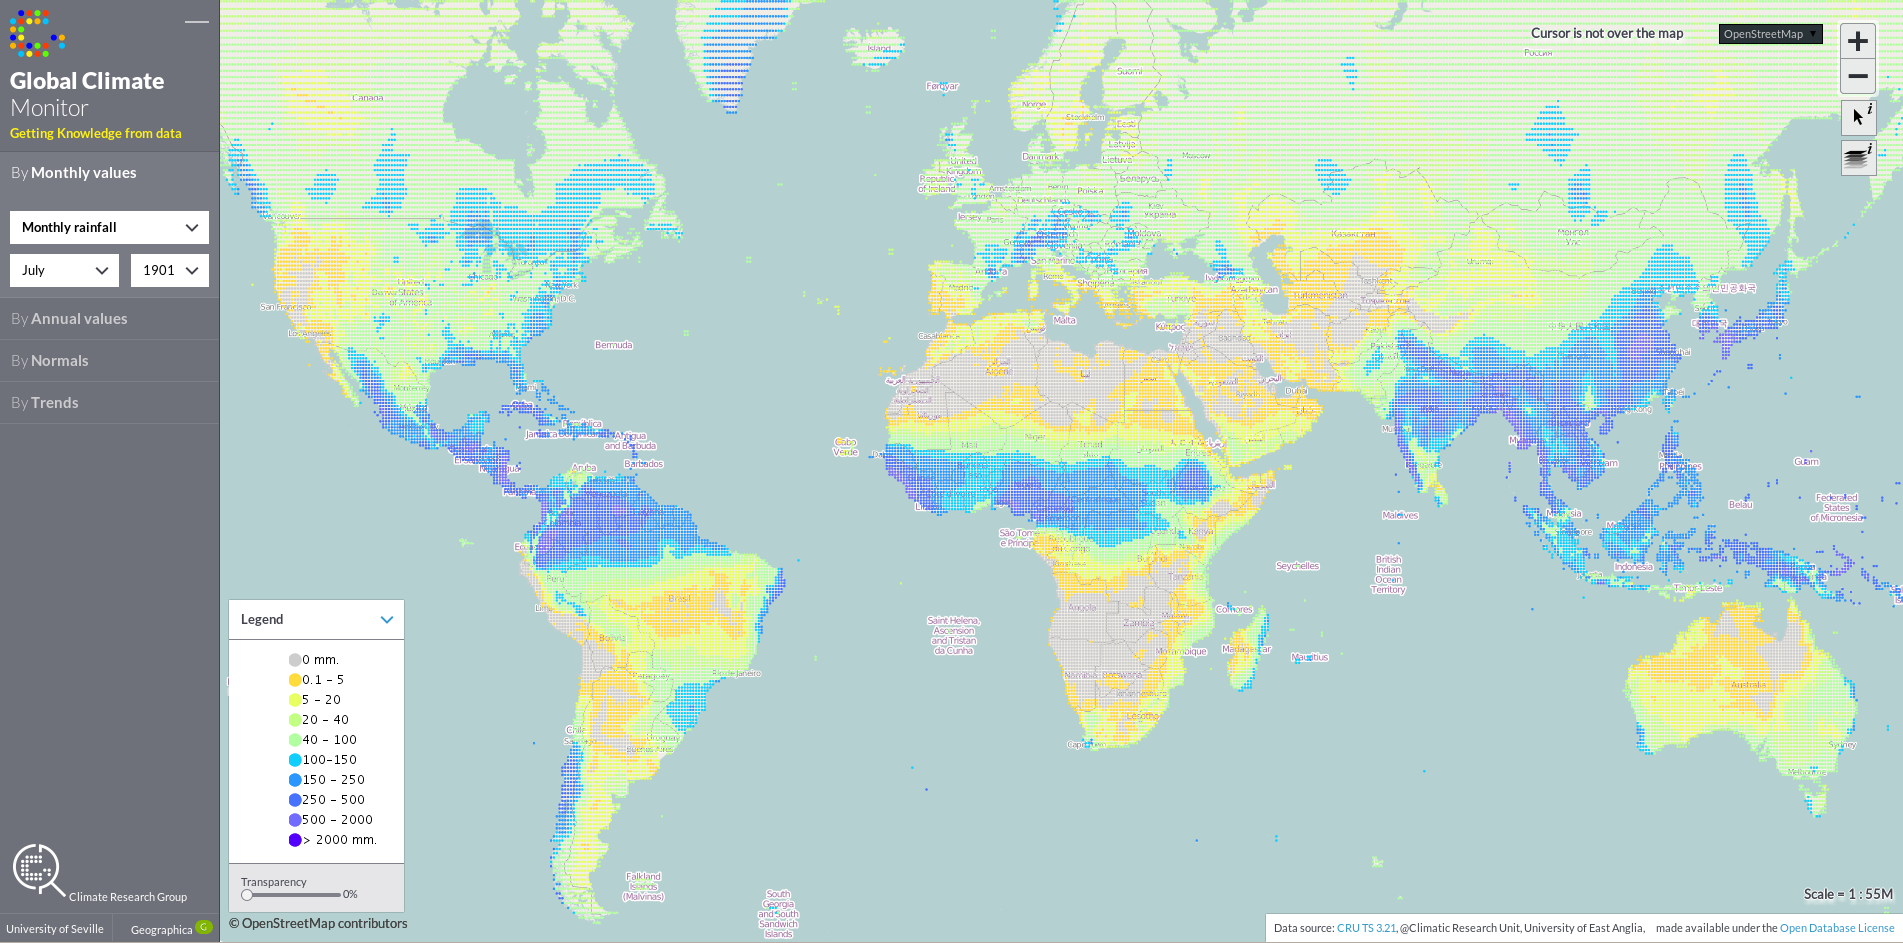 Global Climate Monitor - Monthly Rainfall - July 1901